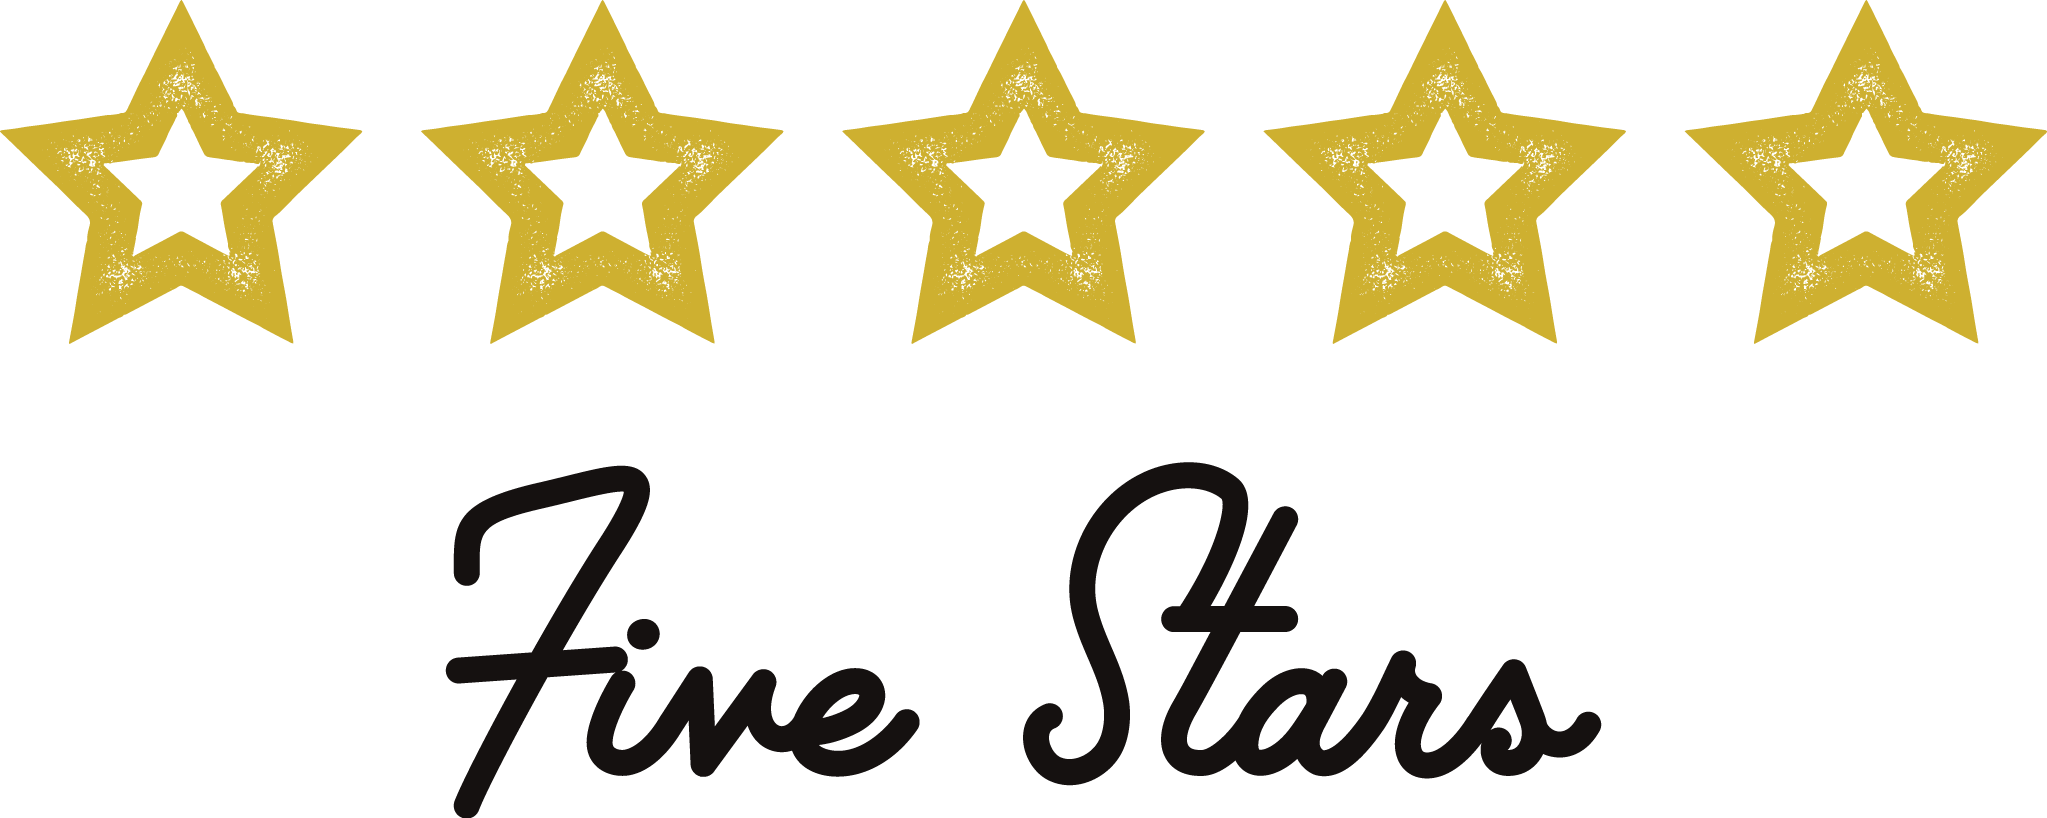 Five Out Of Five Stars (2047x818)